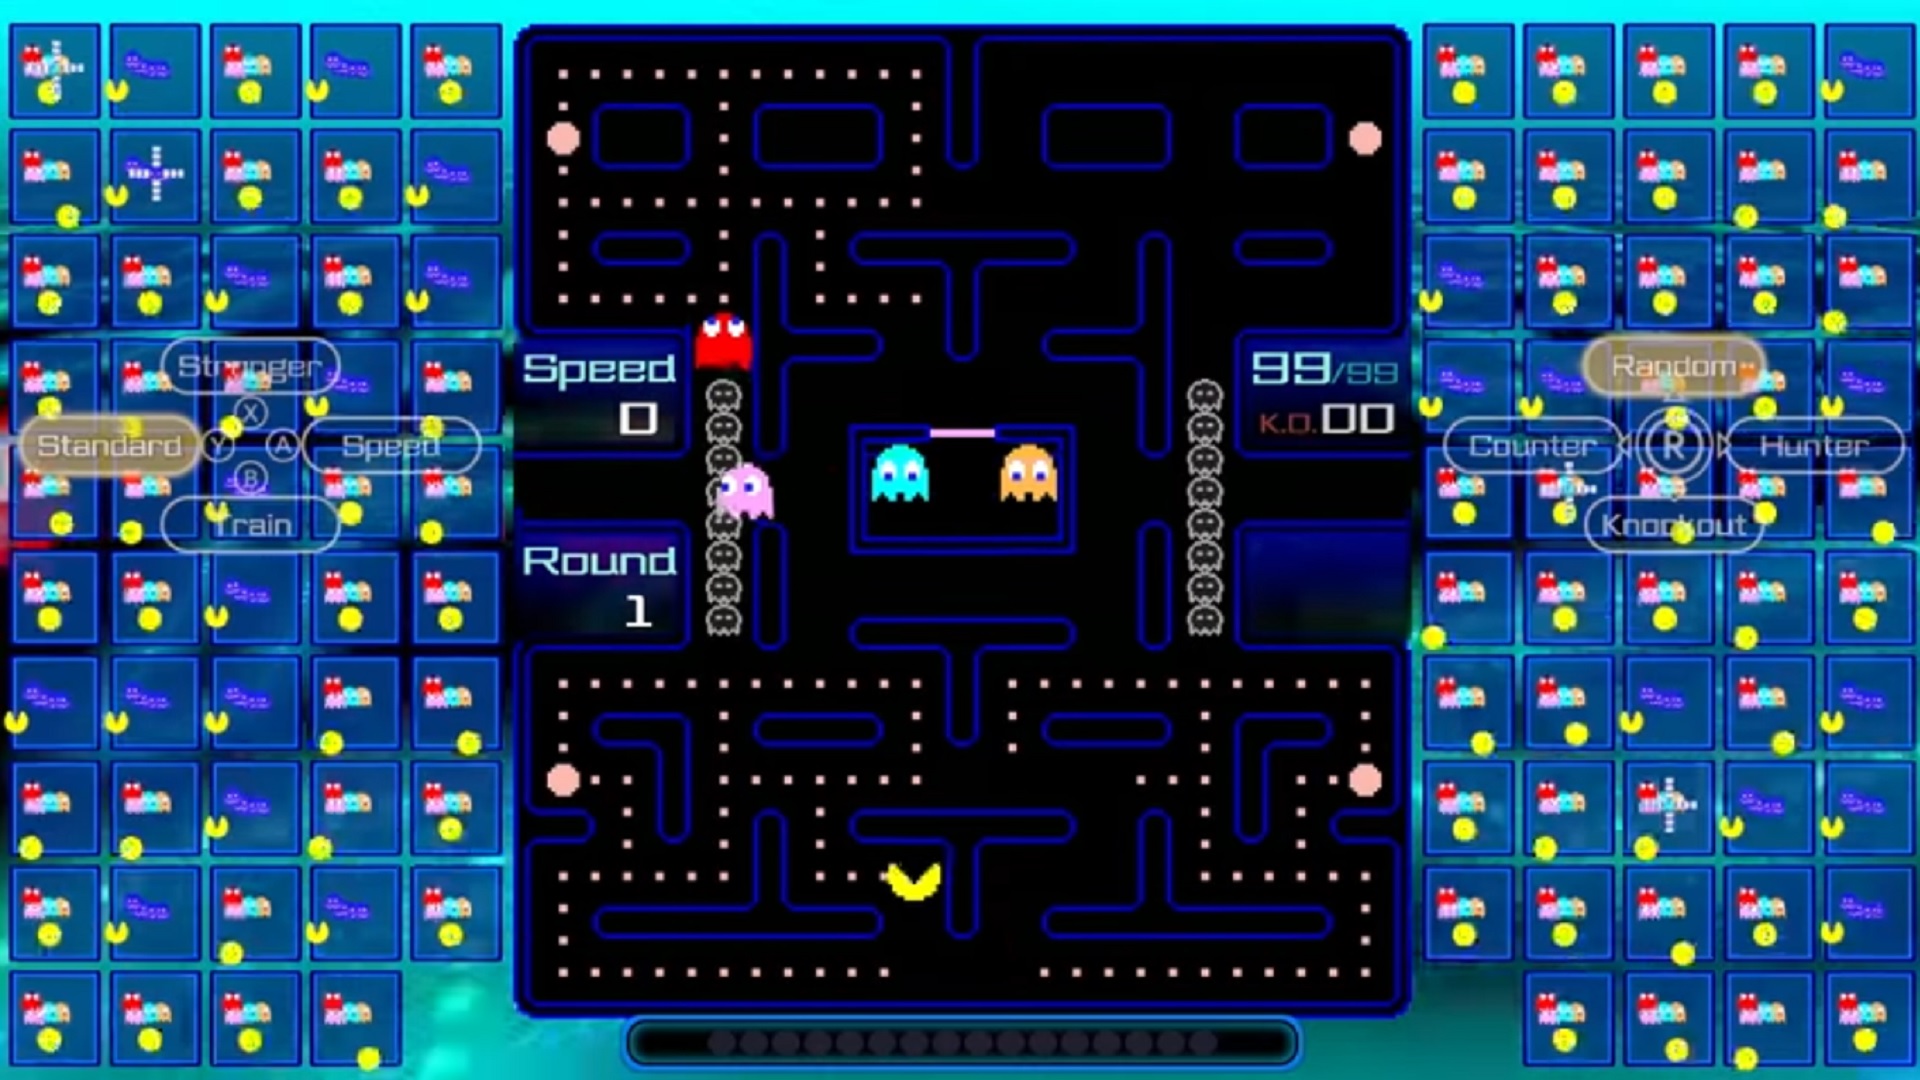 PAC-MAN 99 Available Now on Nintendo Switch